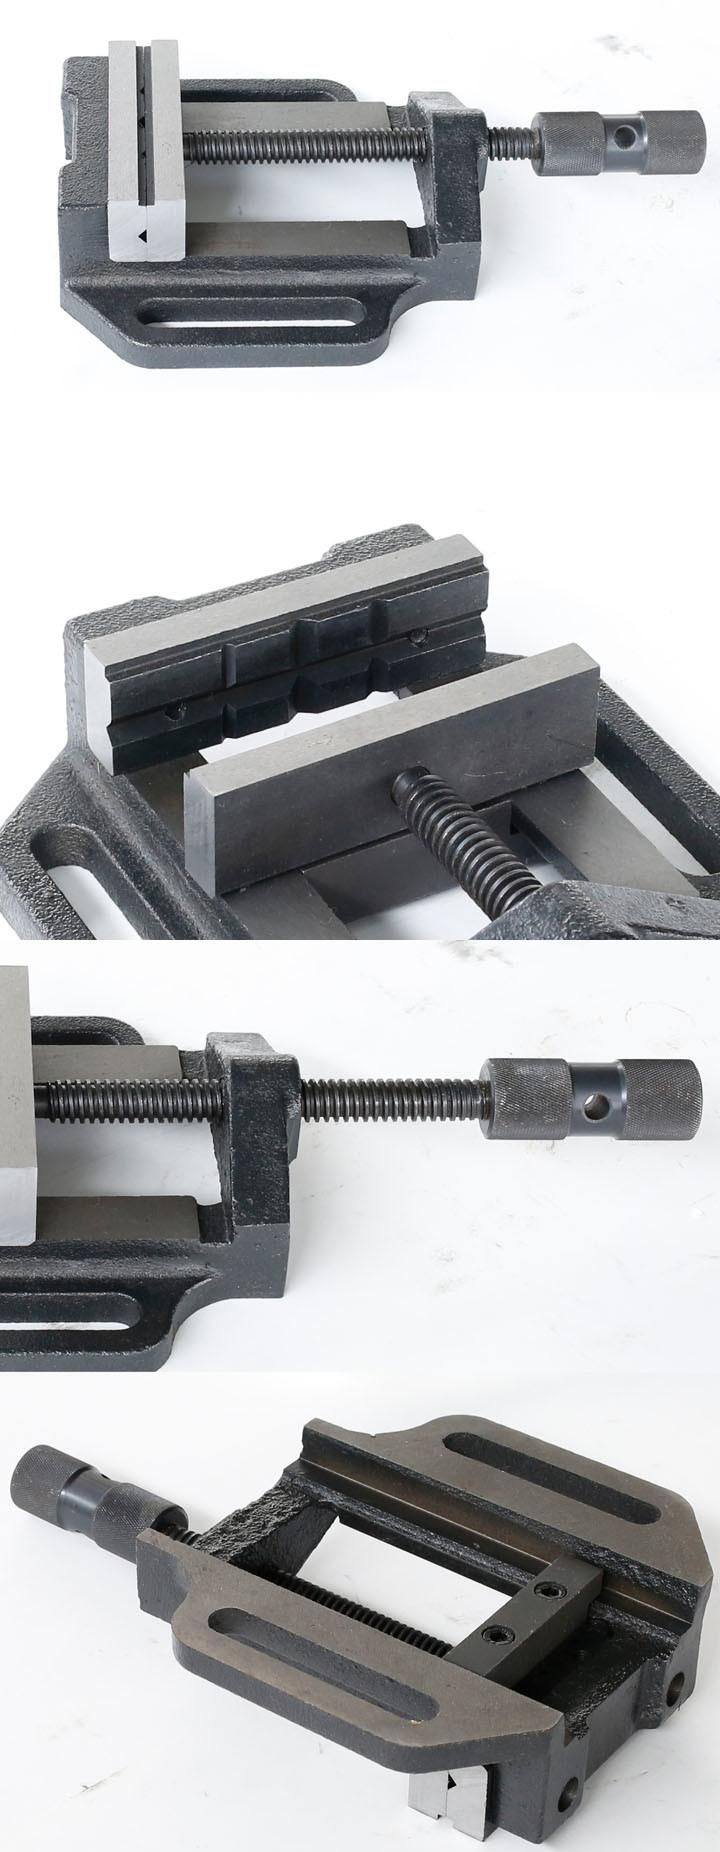 Drilling Press Vise for Tapping